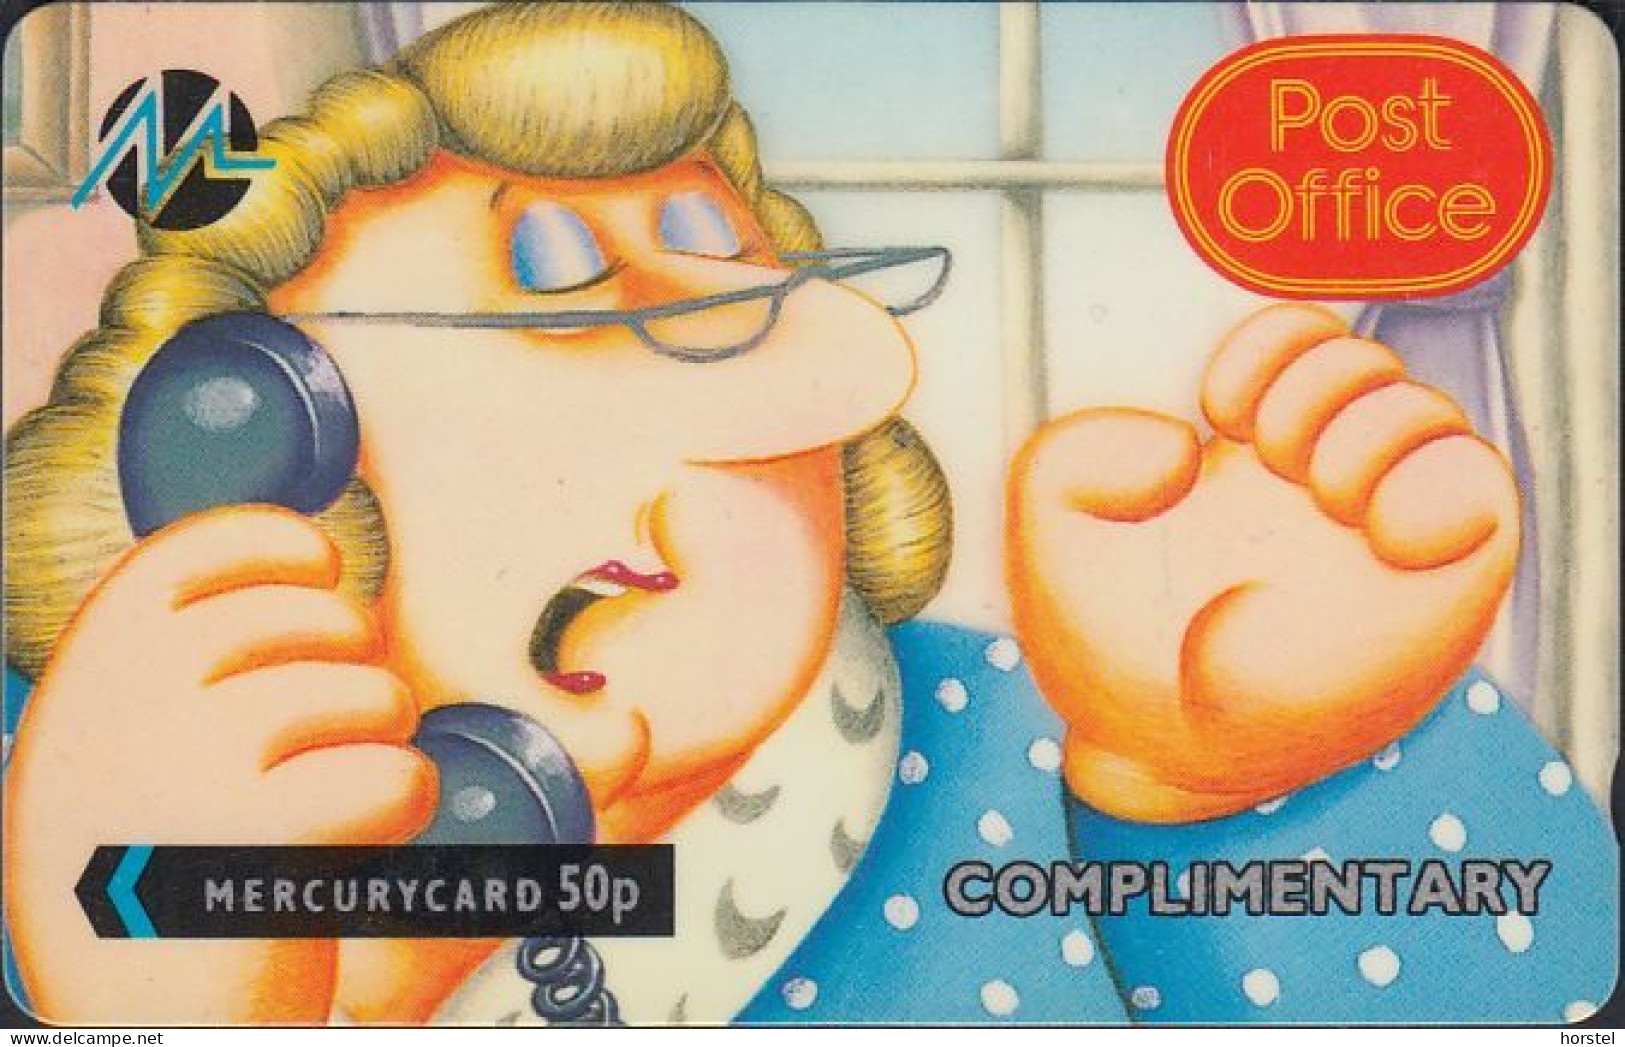 Paytelco Cards - PYPO004 - Post Office Ada - Comic - 50p - Complimentary - 5PPOA - [ 4] Mercury Communications & Paytelco